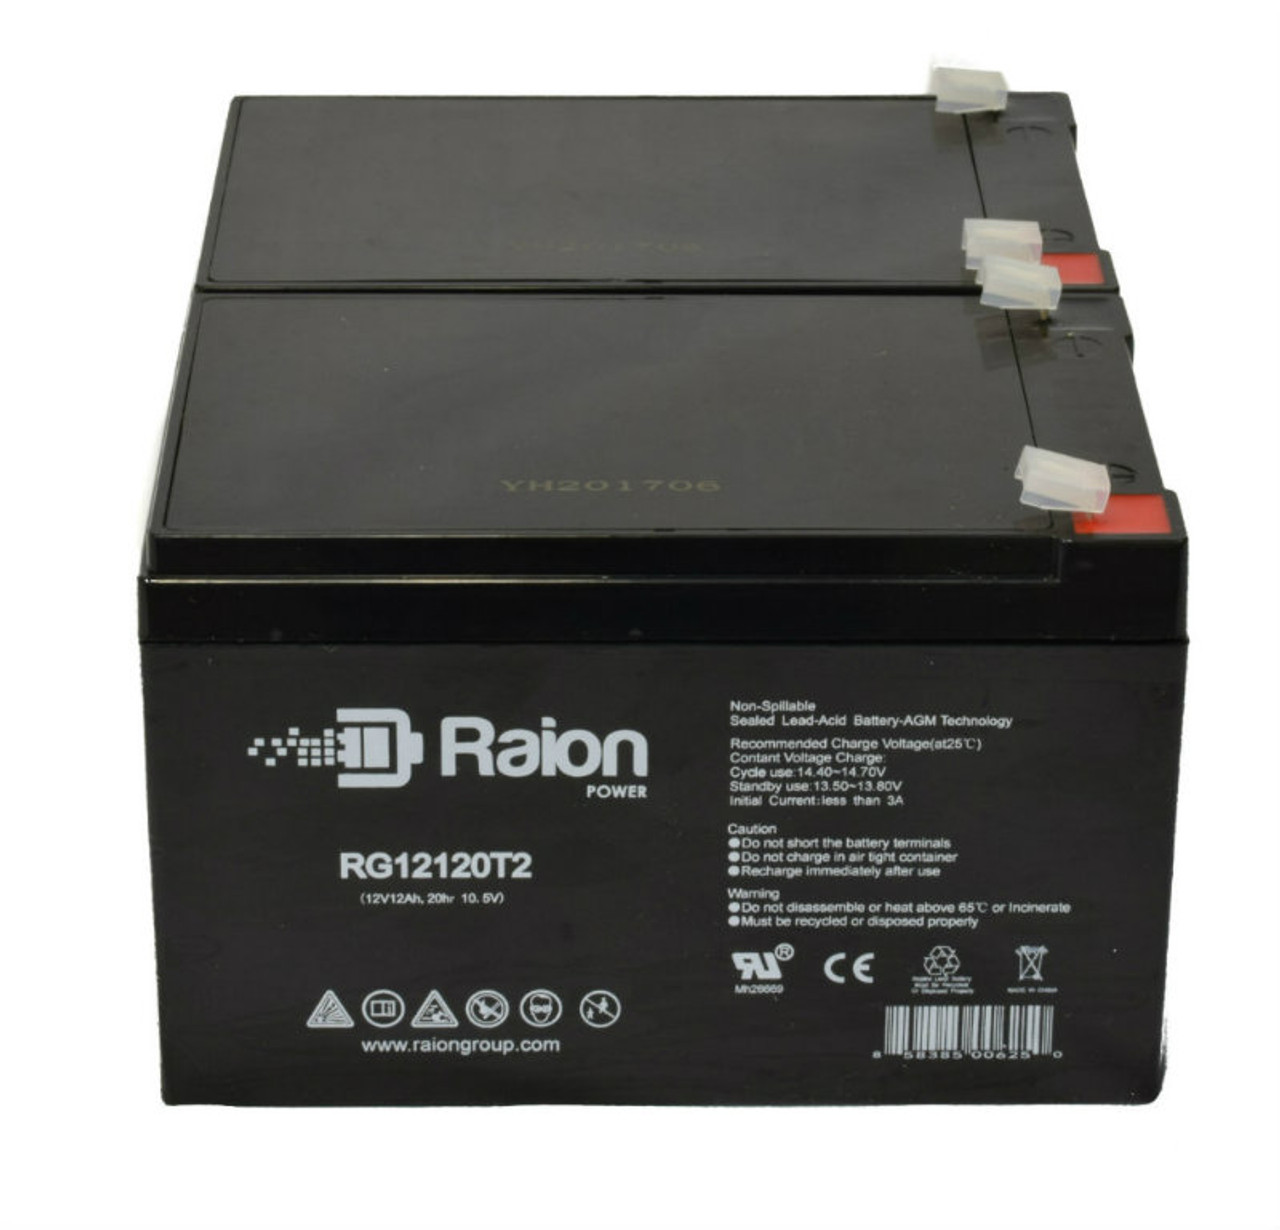 Raion Power RG12120T2 Replacement Battery Set for ShoPride Mobilityr Scootie Jr. (TE-787M) Mobility Scooter - 2 Pack